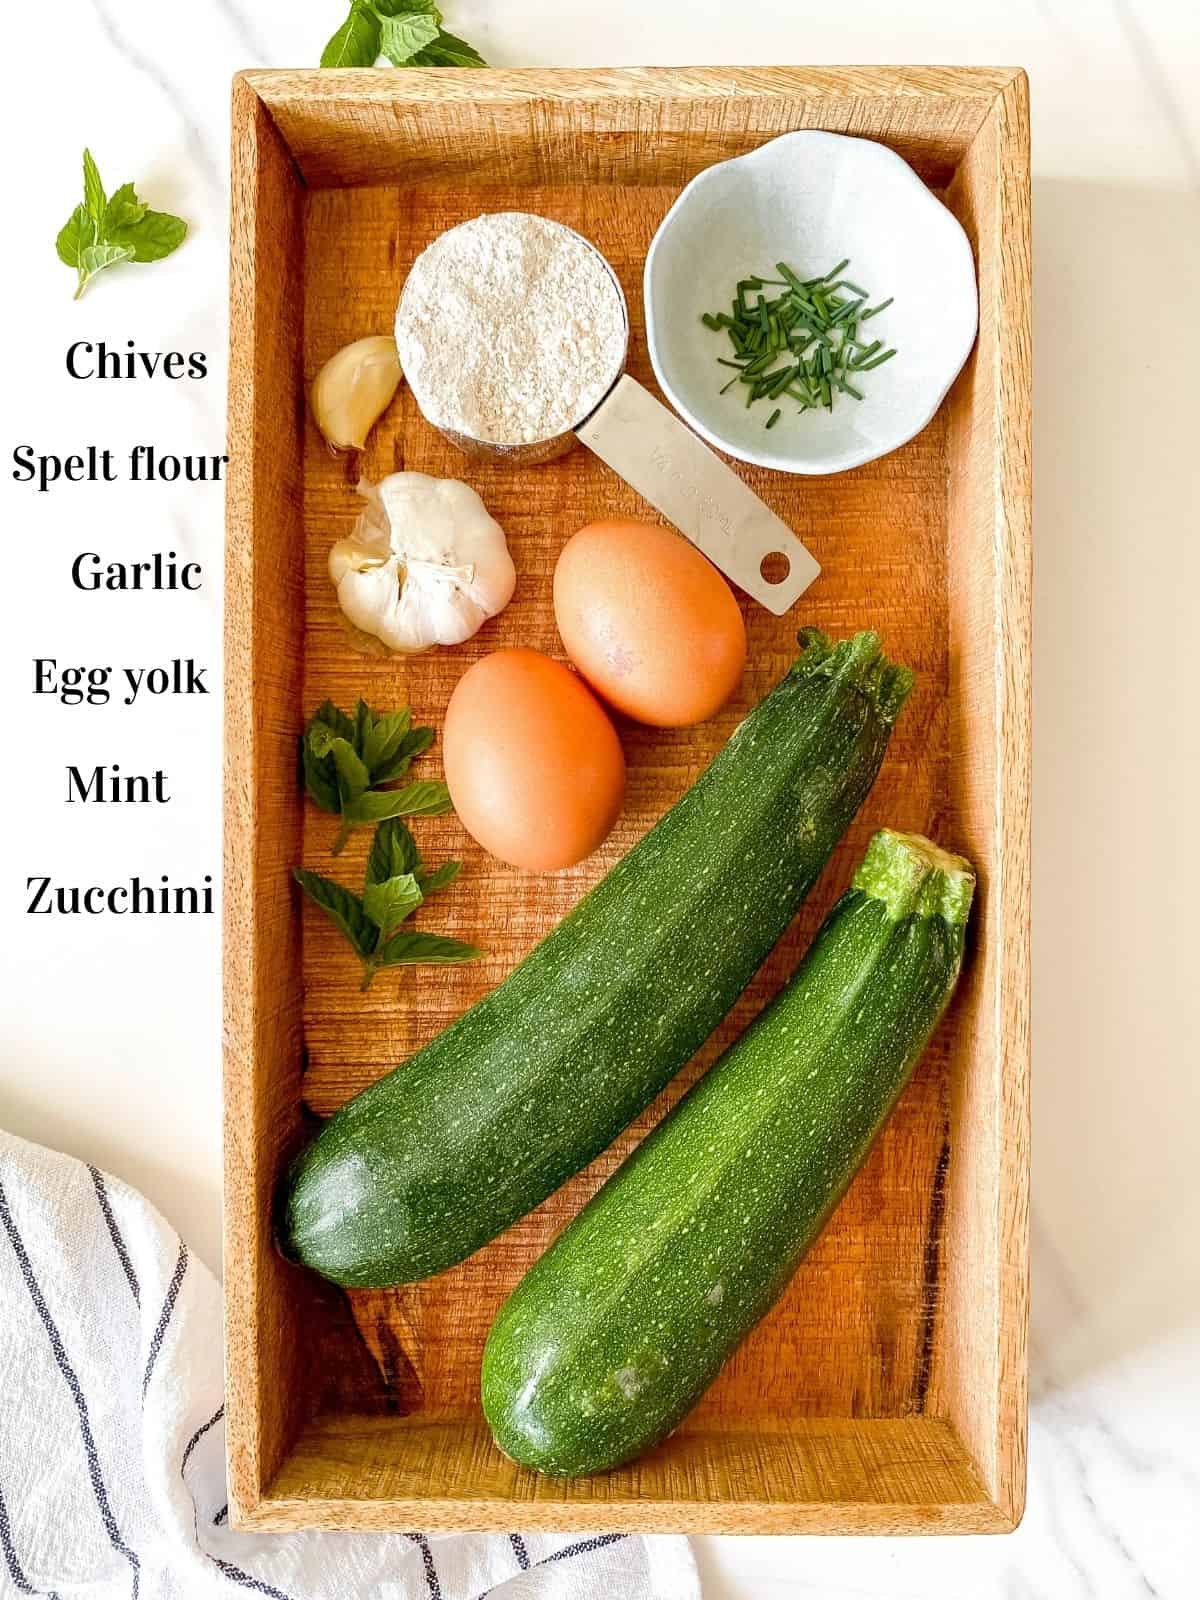 wooden box containing zucchini, mint, garlic, chives, spelt flour and eggs.